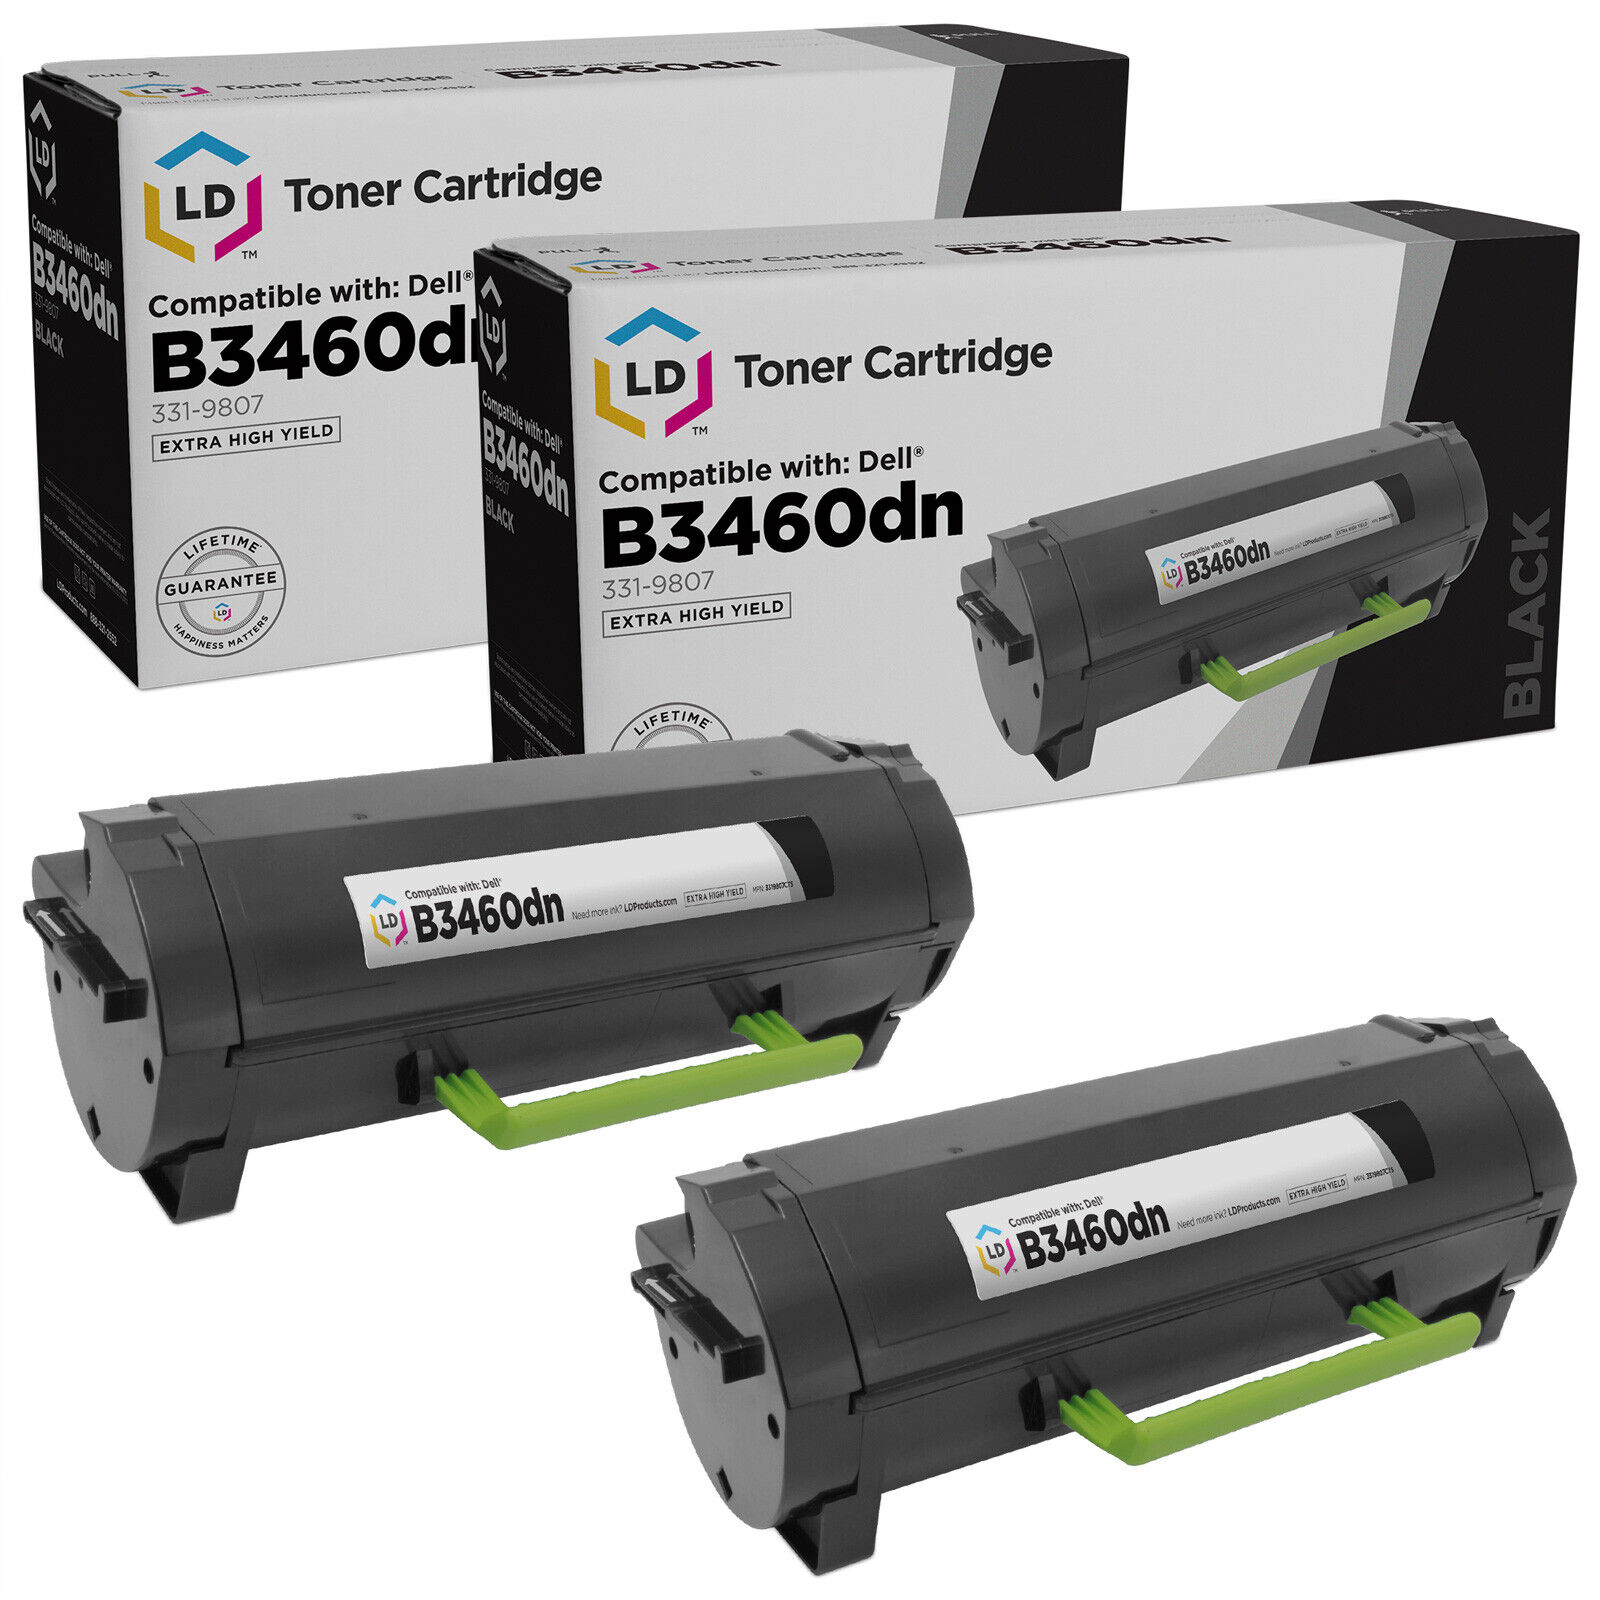 LD Compatible Replacement for Dell 331-9807 Extra HY Black Toner 2PK for B3460dn